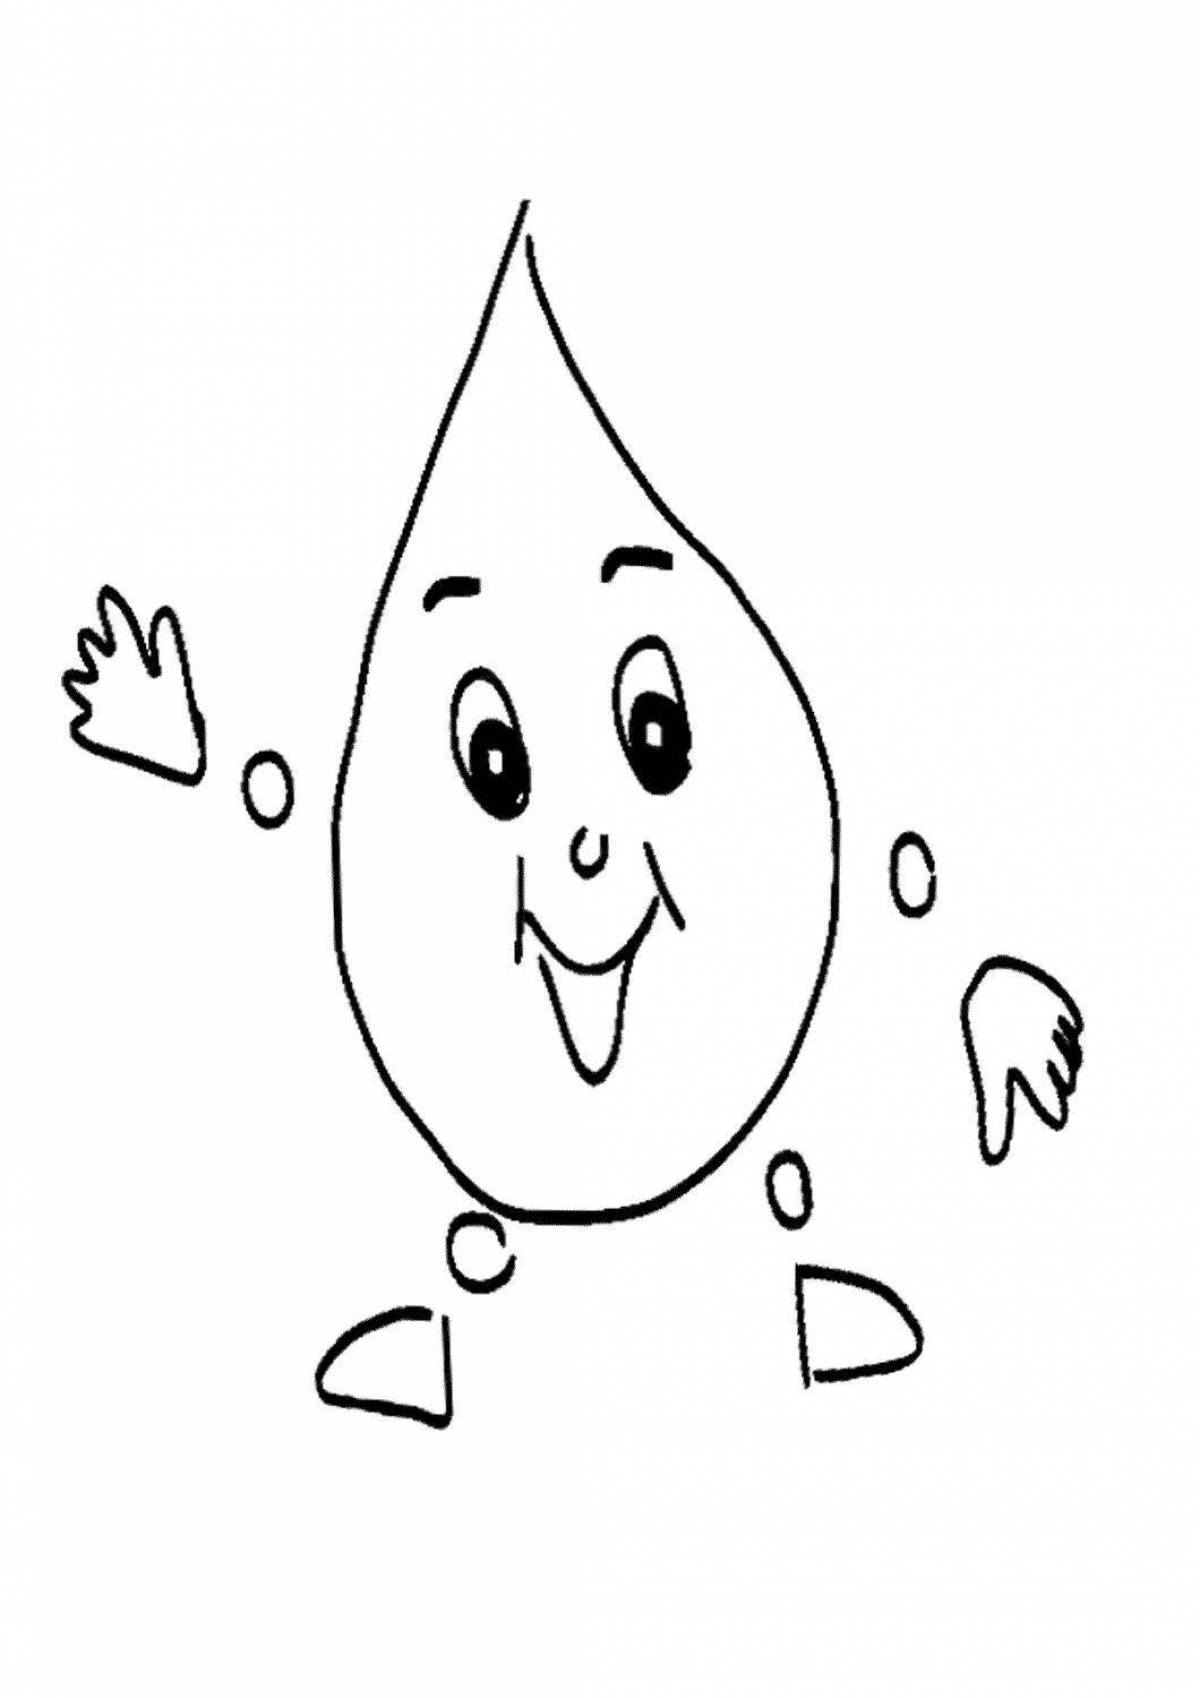 Crystal water drop coloring page